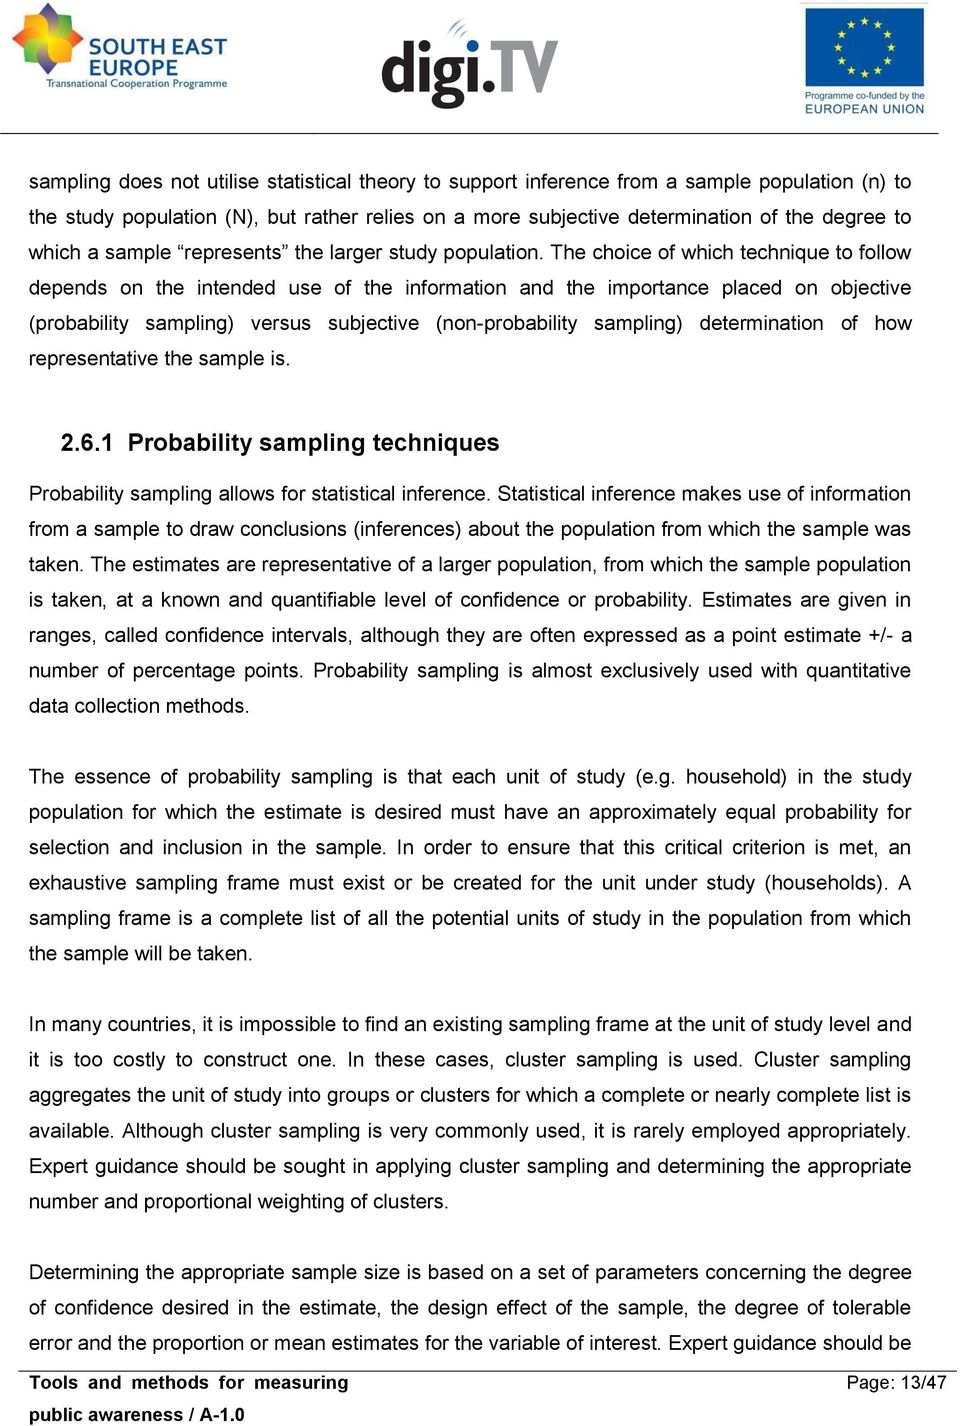 The choice of which technique to follow depends on the intended use of the information and the importance placed on objective (probability sampling) versus subjective (non-probability sampling)